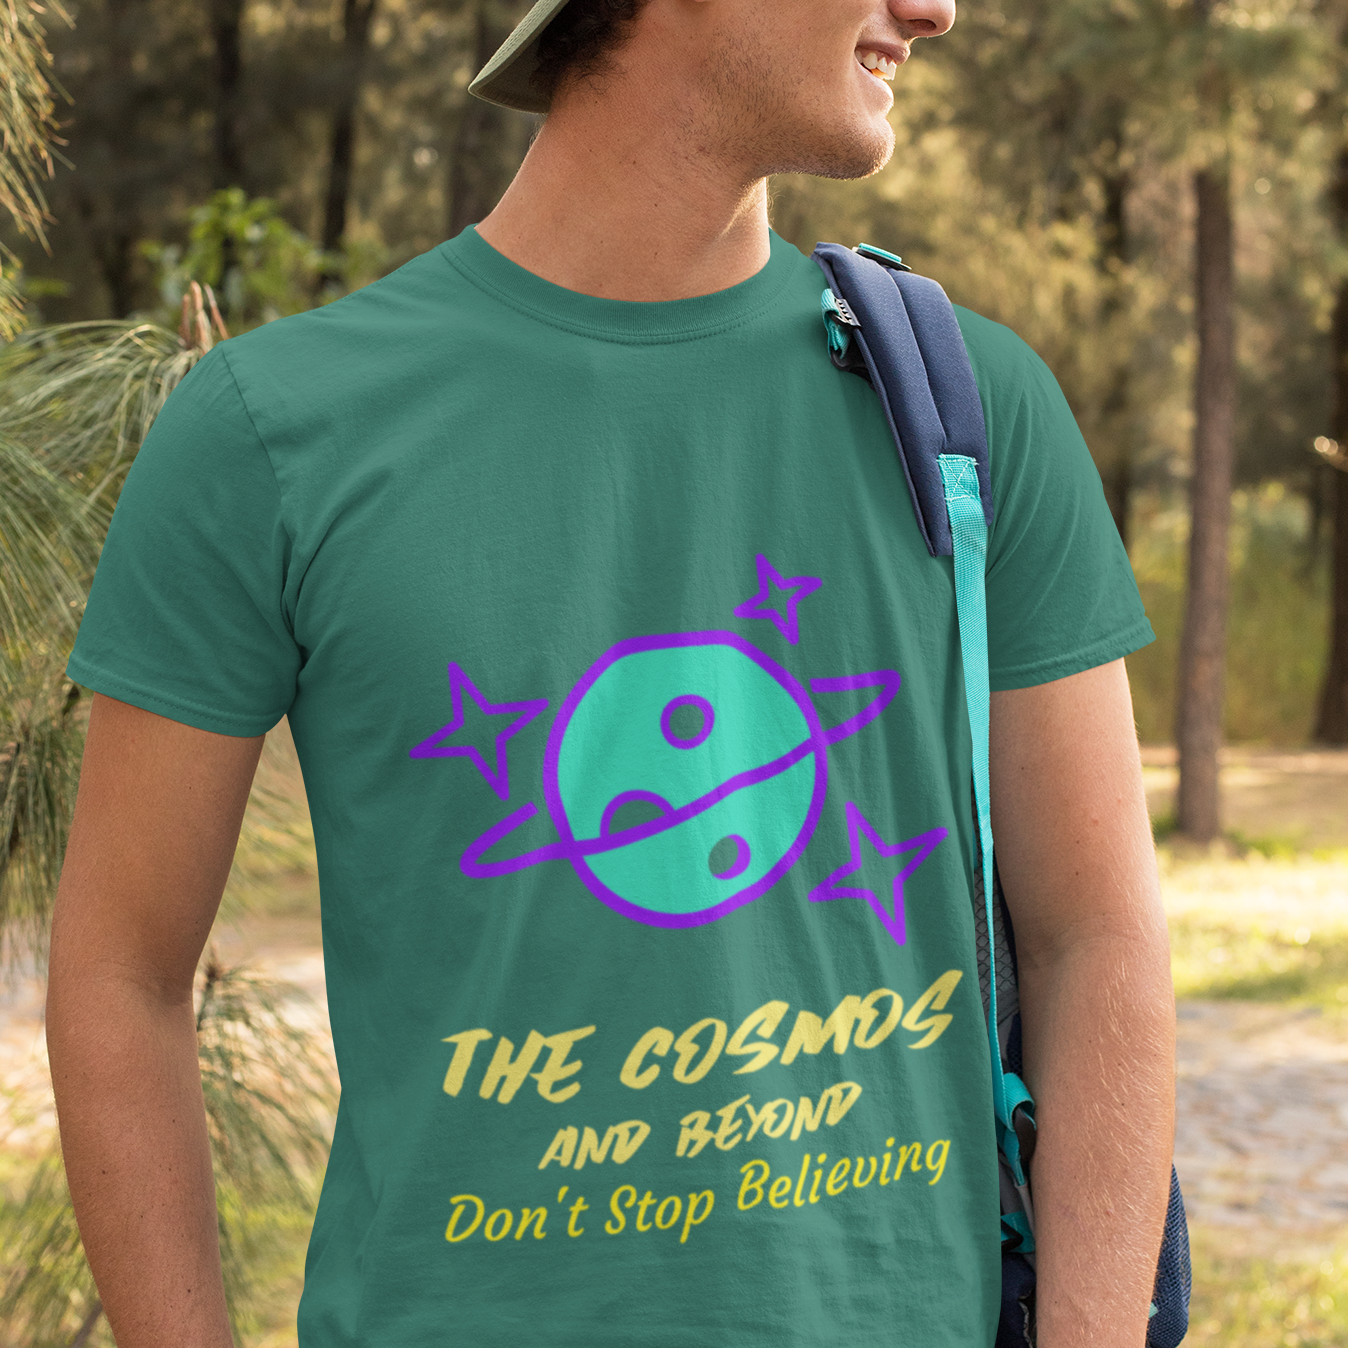 the cosmos and beyond t shirt great gift